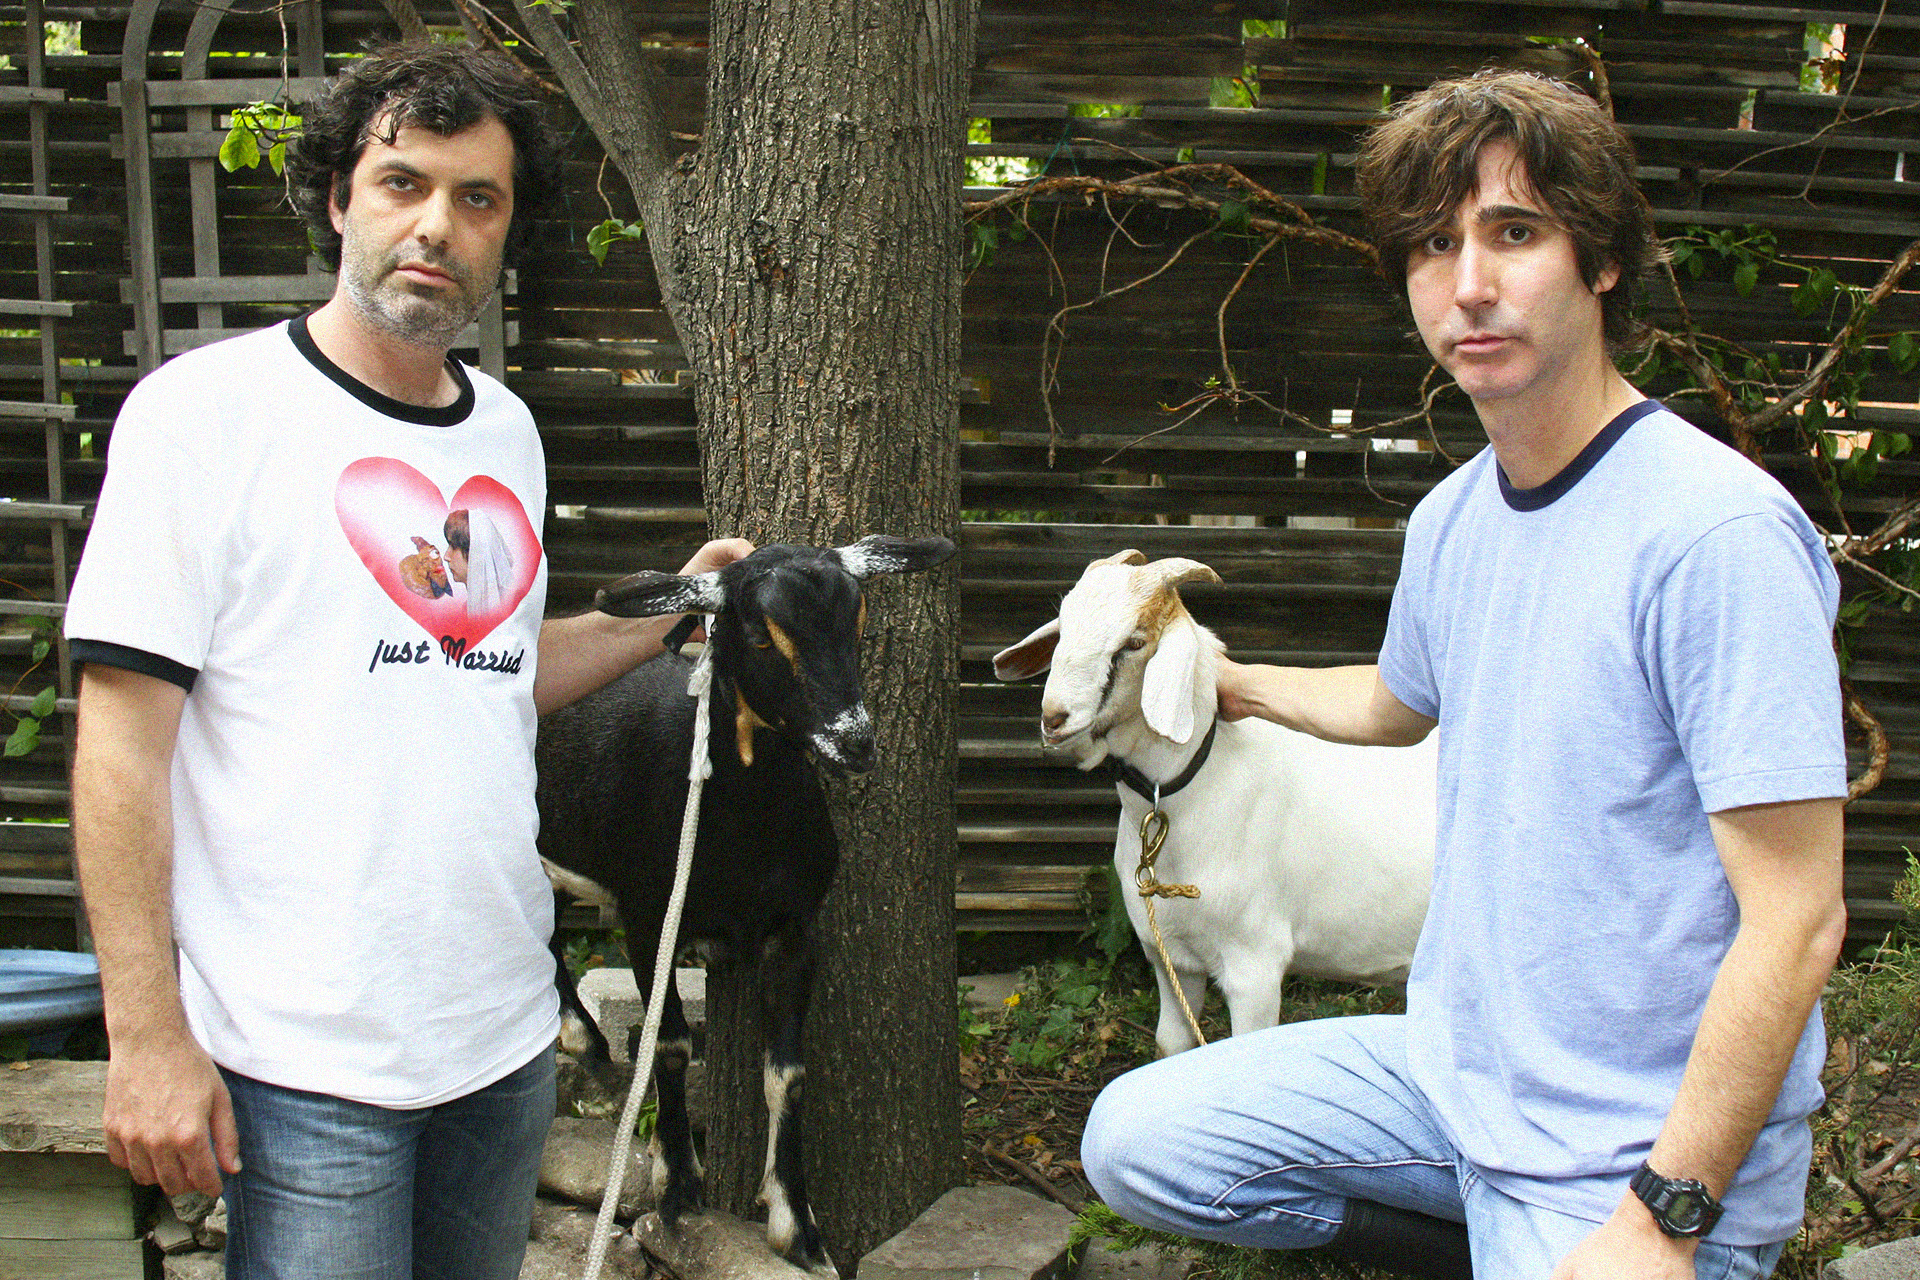 Kenny vs spenny episodes with bianca.